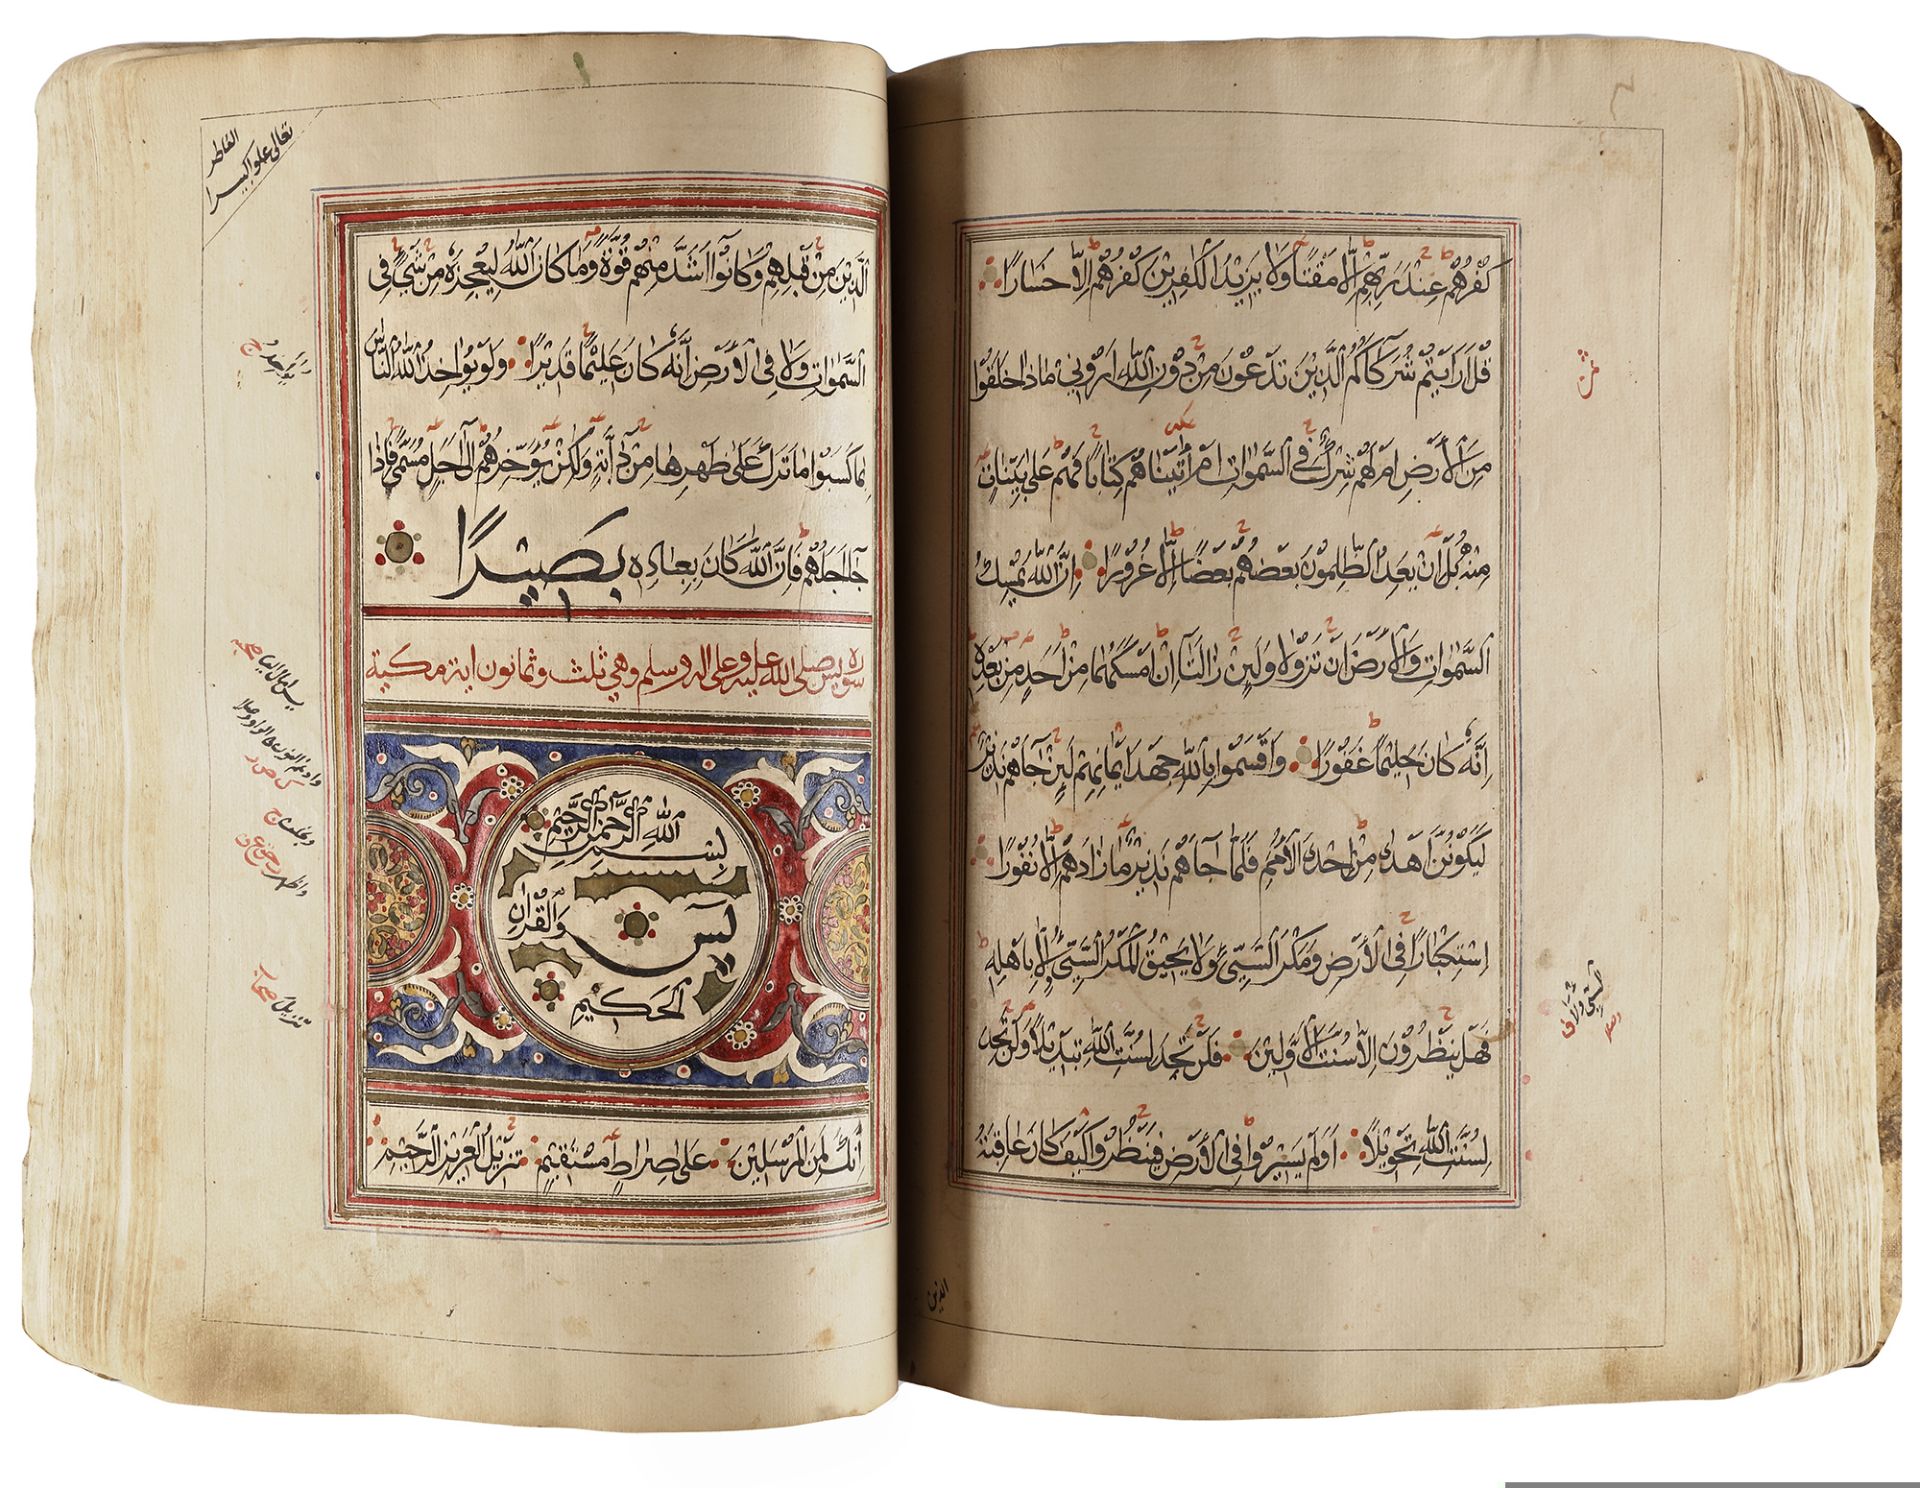 AN ILLUMINATED QURAN, YEMEN, BY AHMED QASEM IBN ISMAIL IN 1035 AH/1626 AD - Image 5 of 18